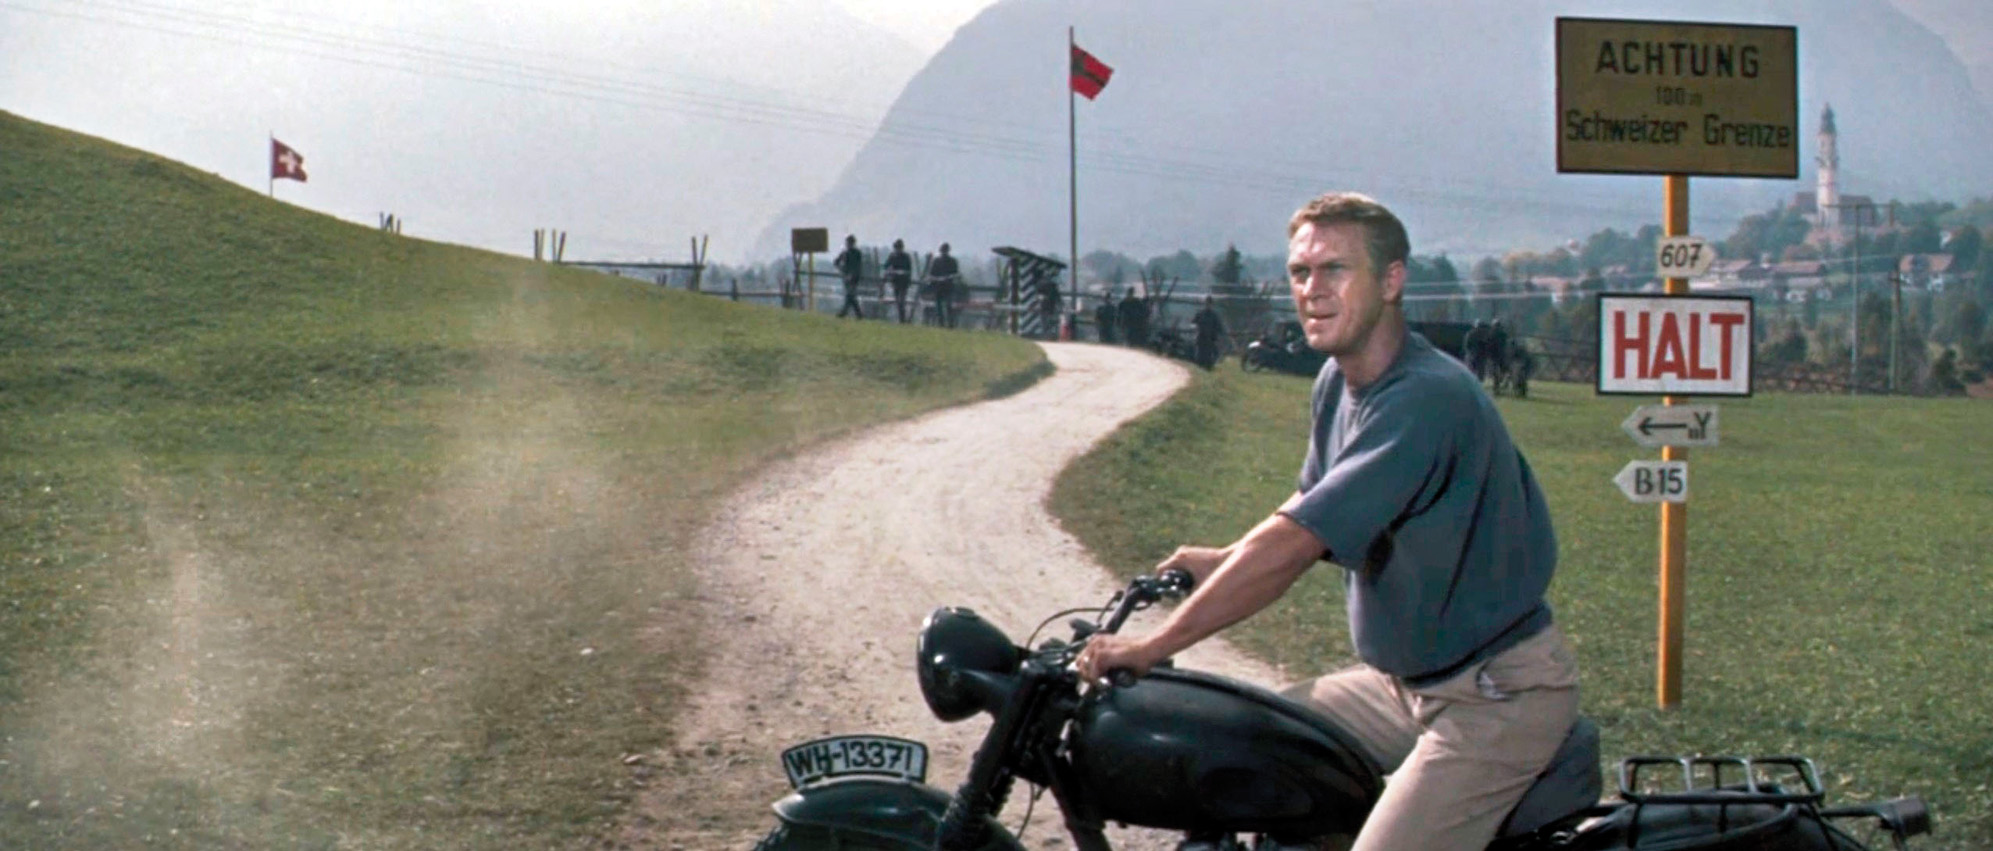 Actor Steve McQueen portrays the “Cooler King” in the film The Great Escape, a character inspired by Bill Ash.